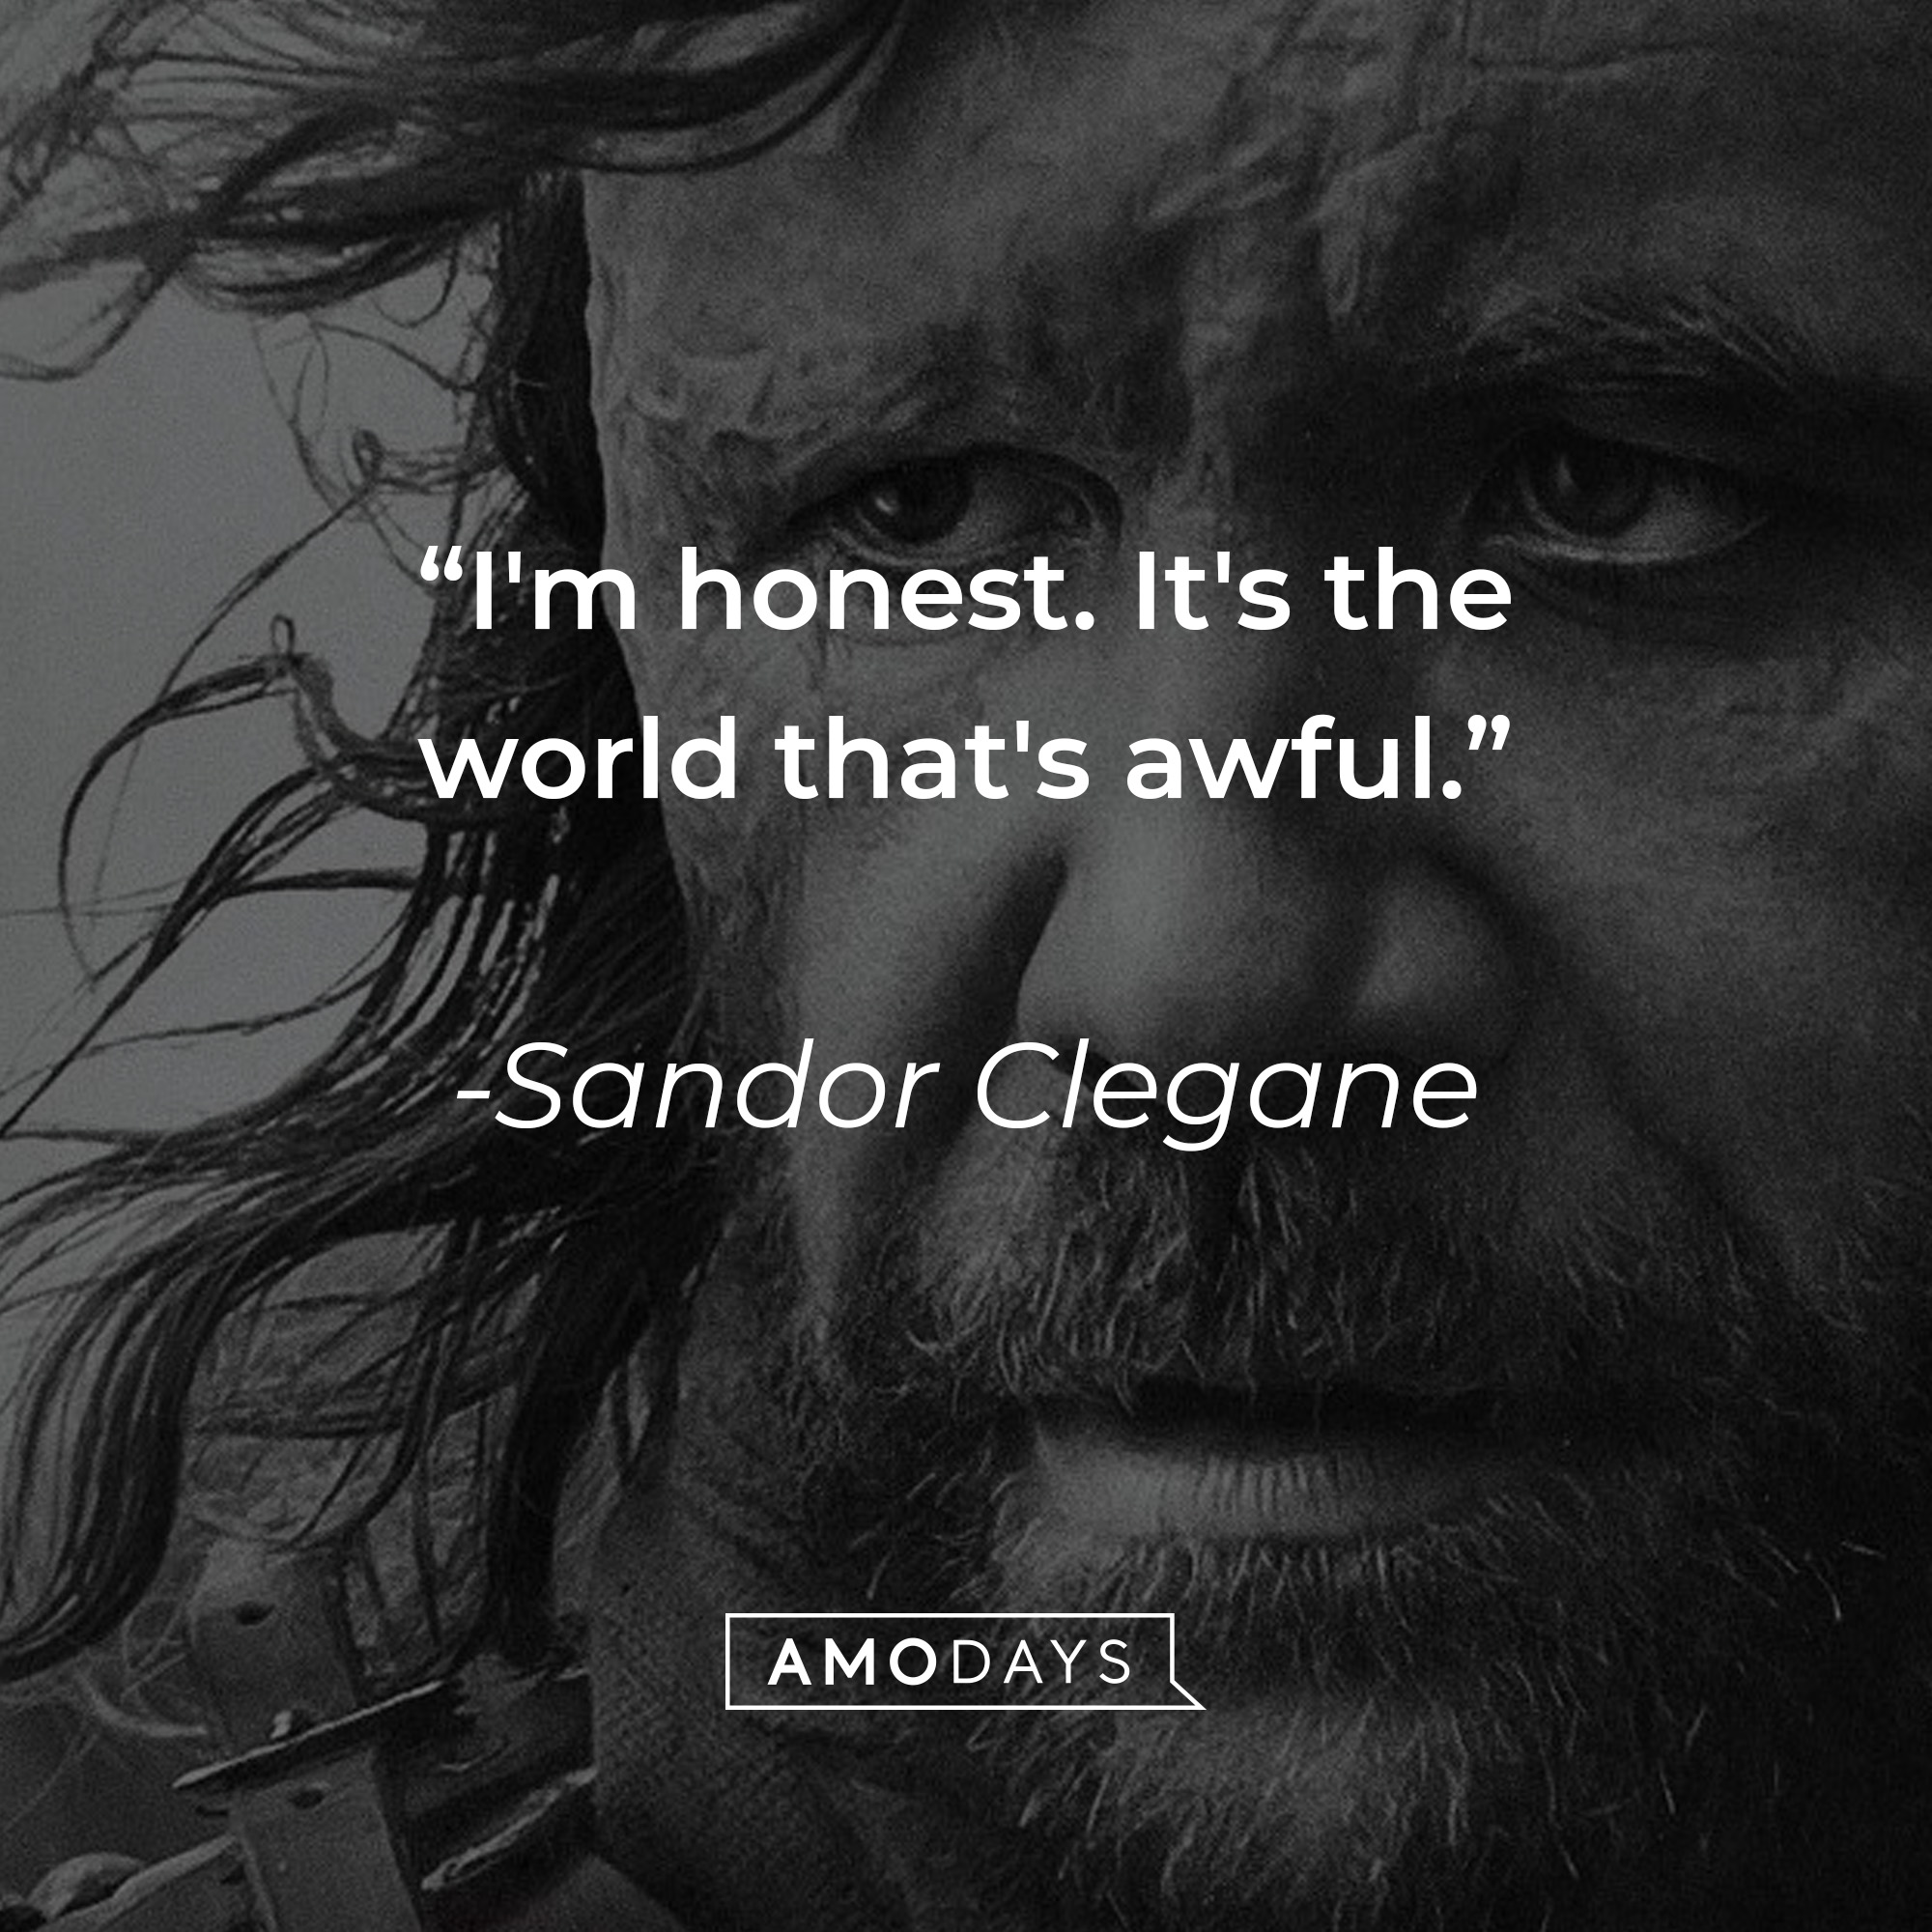 Sandor Clegane's quote: "I'm honest. It's the world that's awful." | Source: facebook.com/GameOfThrones